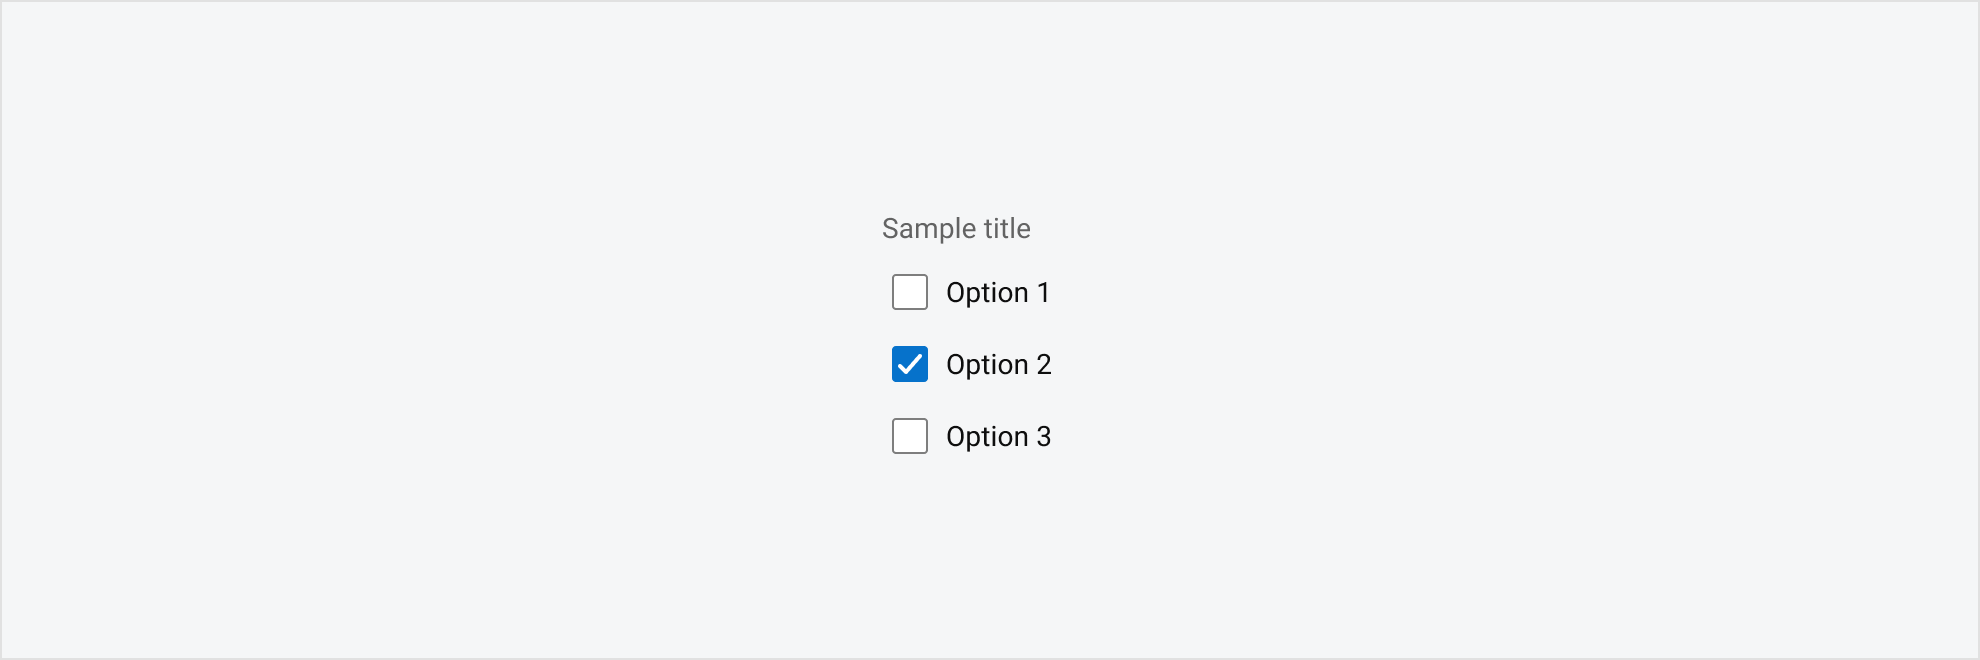  A checkbox group aligned vertically.